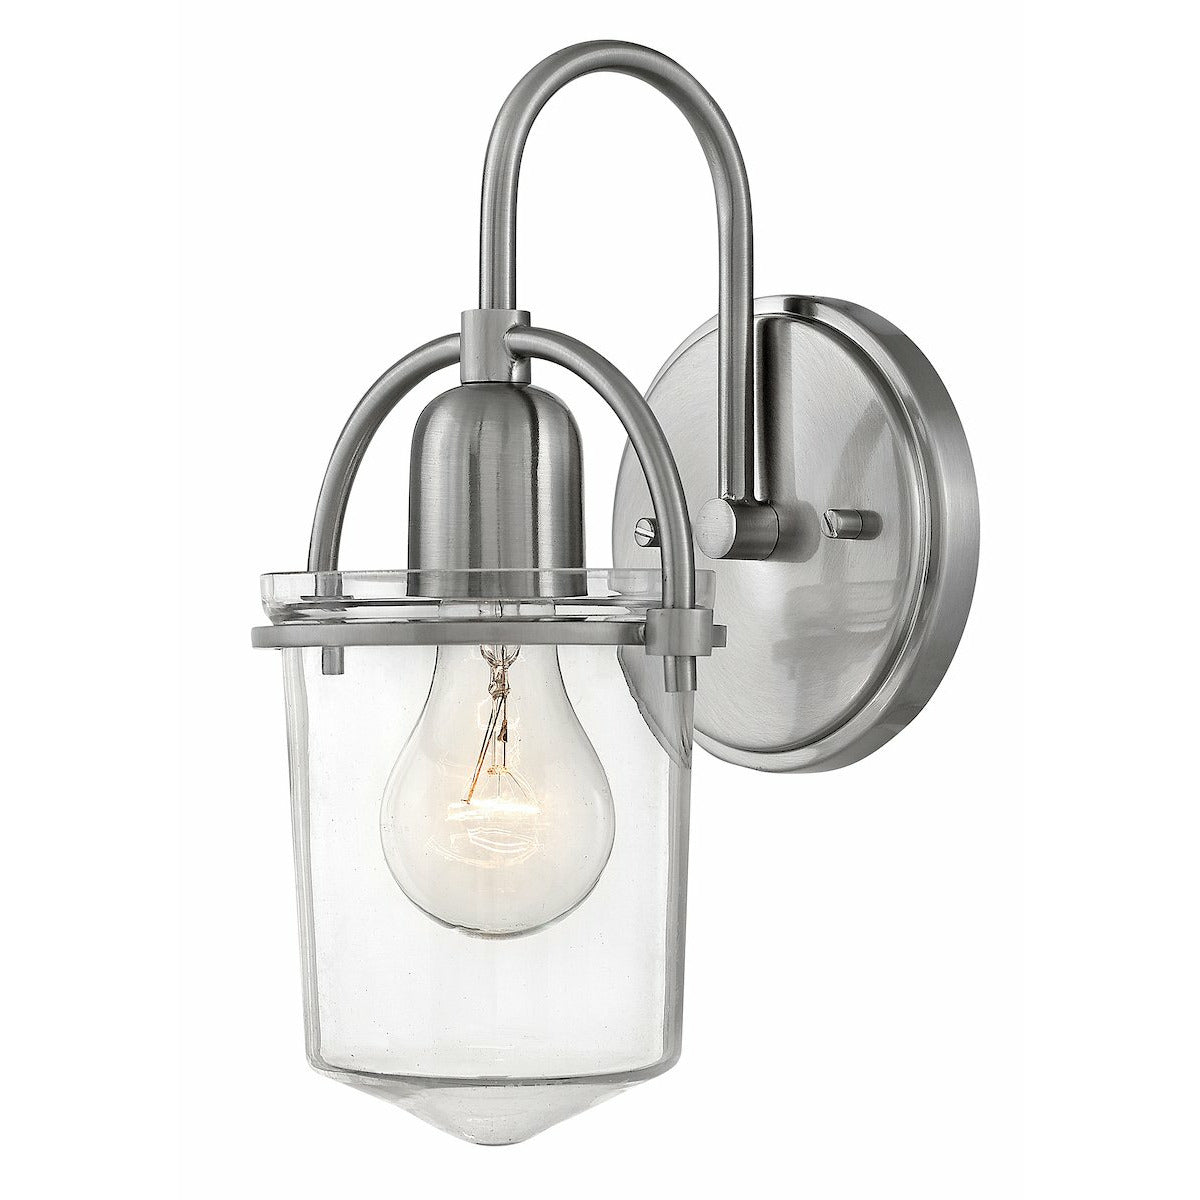 Clancy Sconce Brushed Nickel